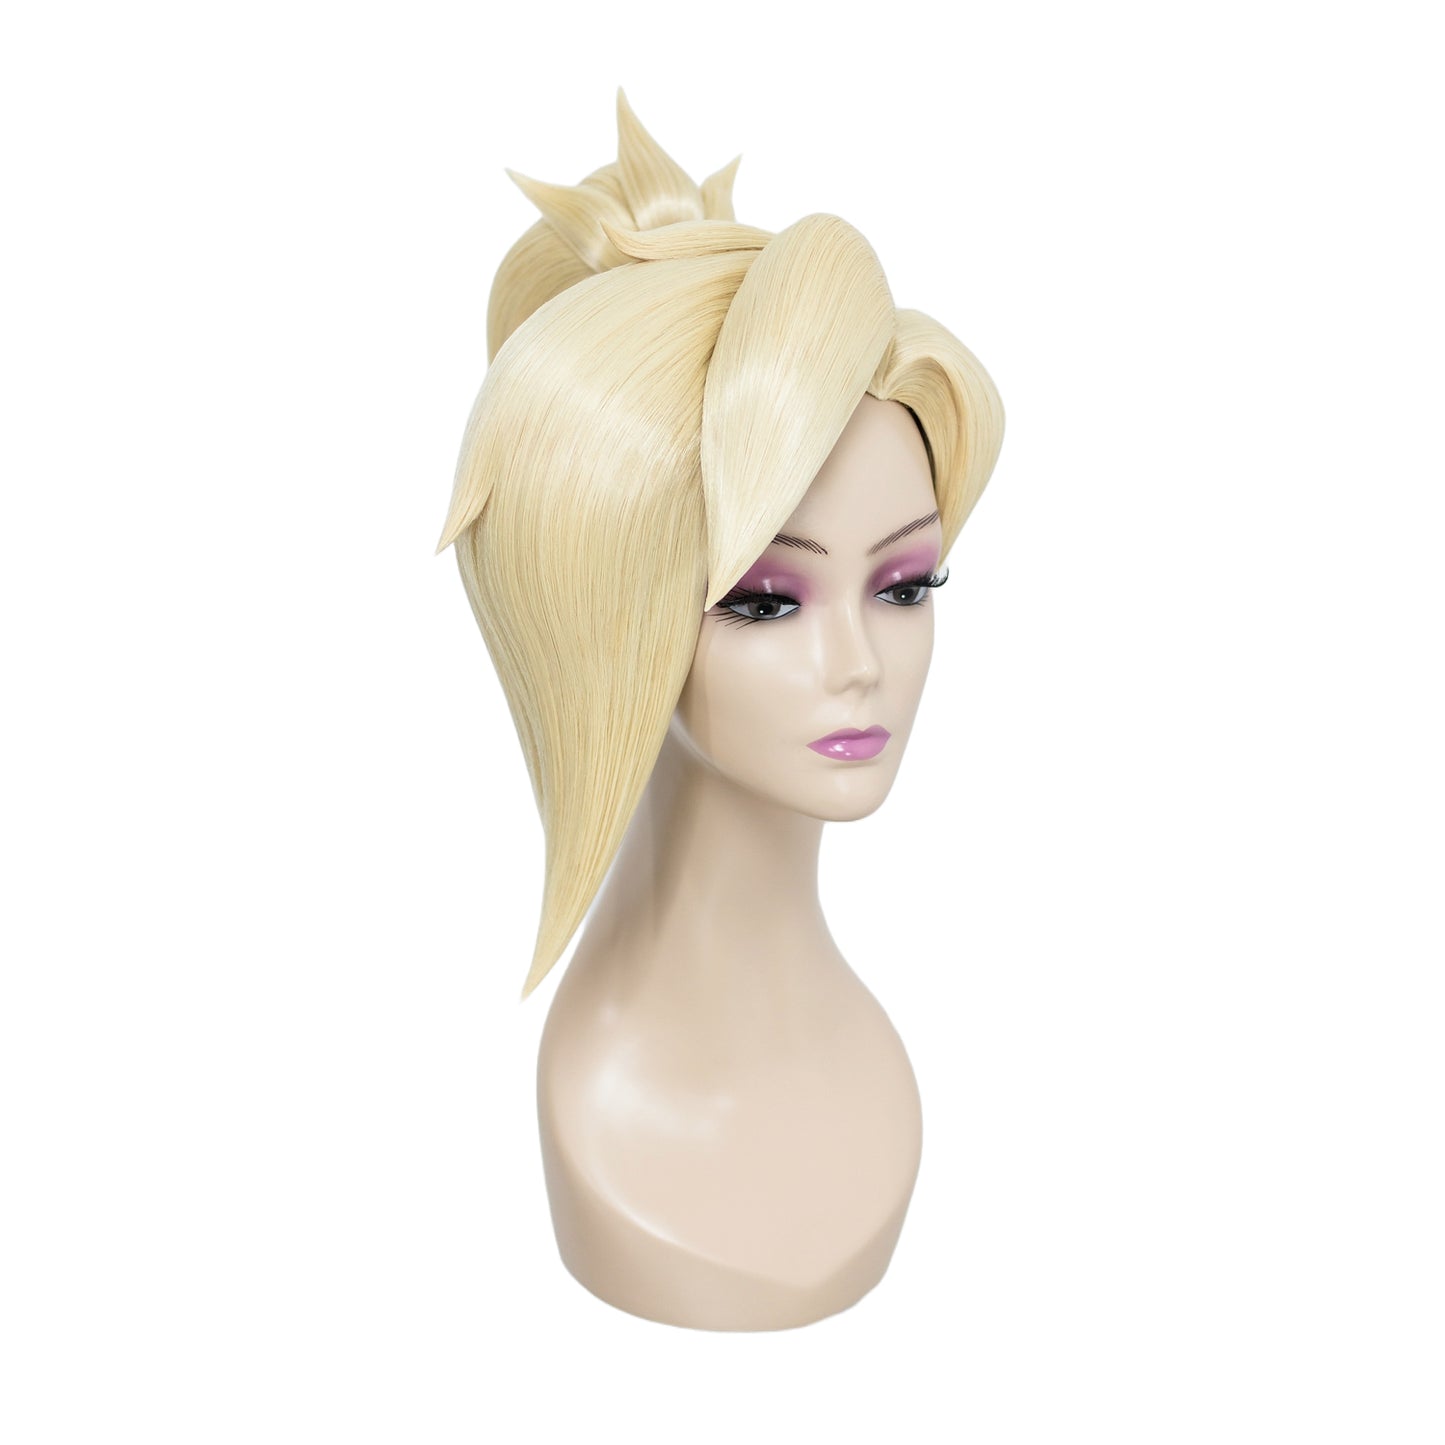 Transform into Mercy: Elevate Your Cosplay with Our Overwatch Mercy Wig